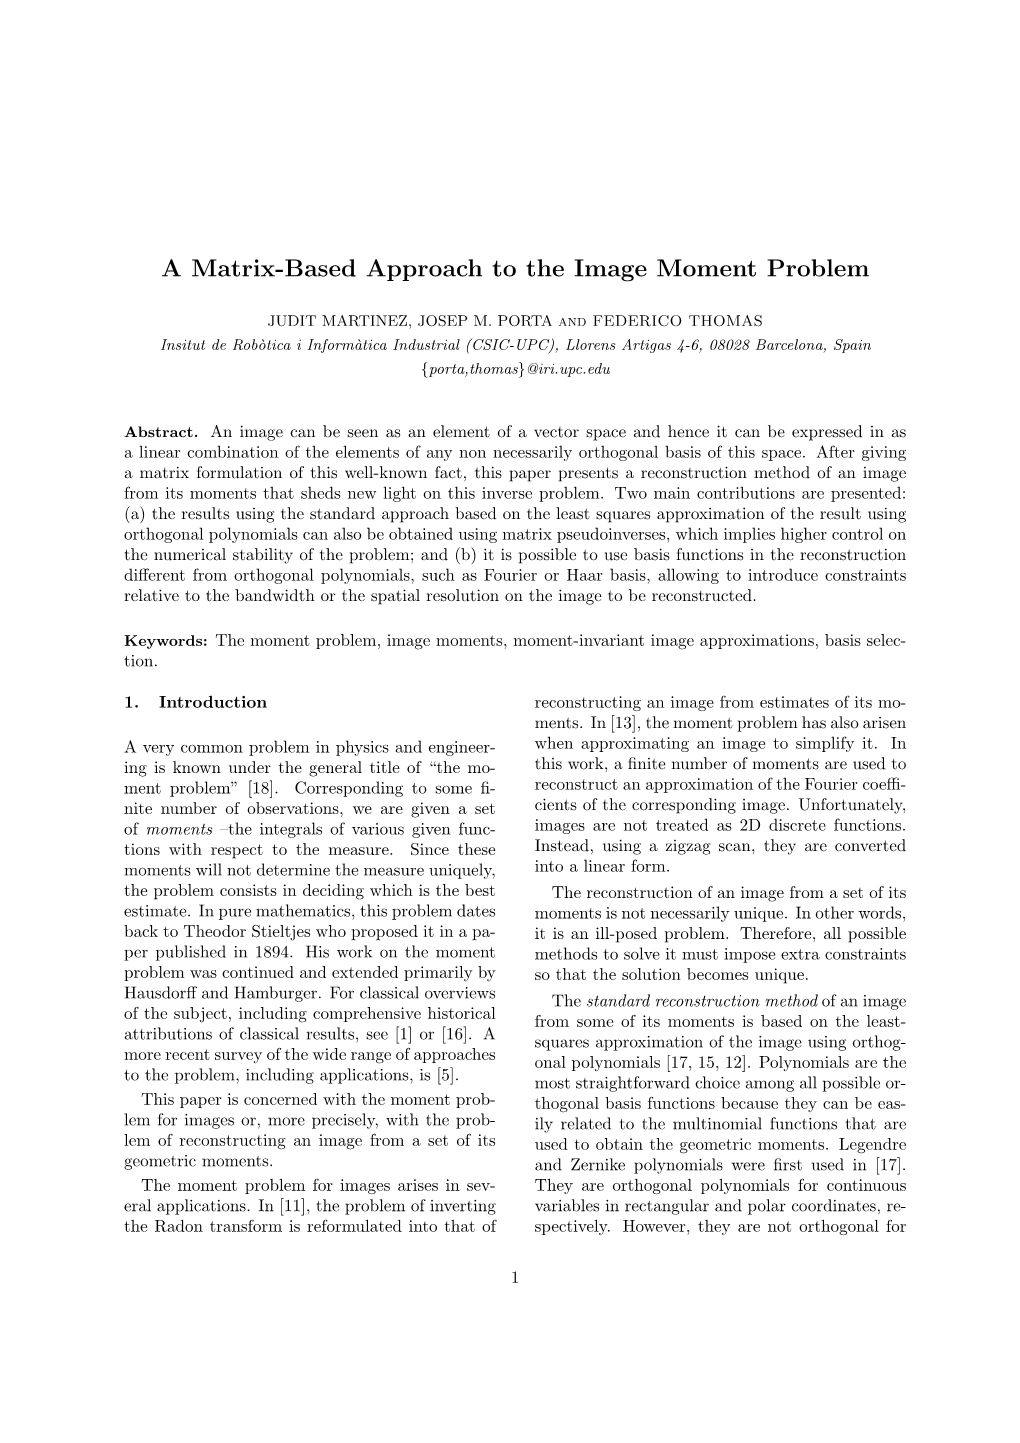 A Matrix-Based Approach to the Image Moment Problem